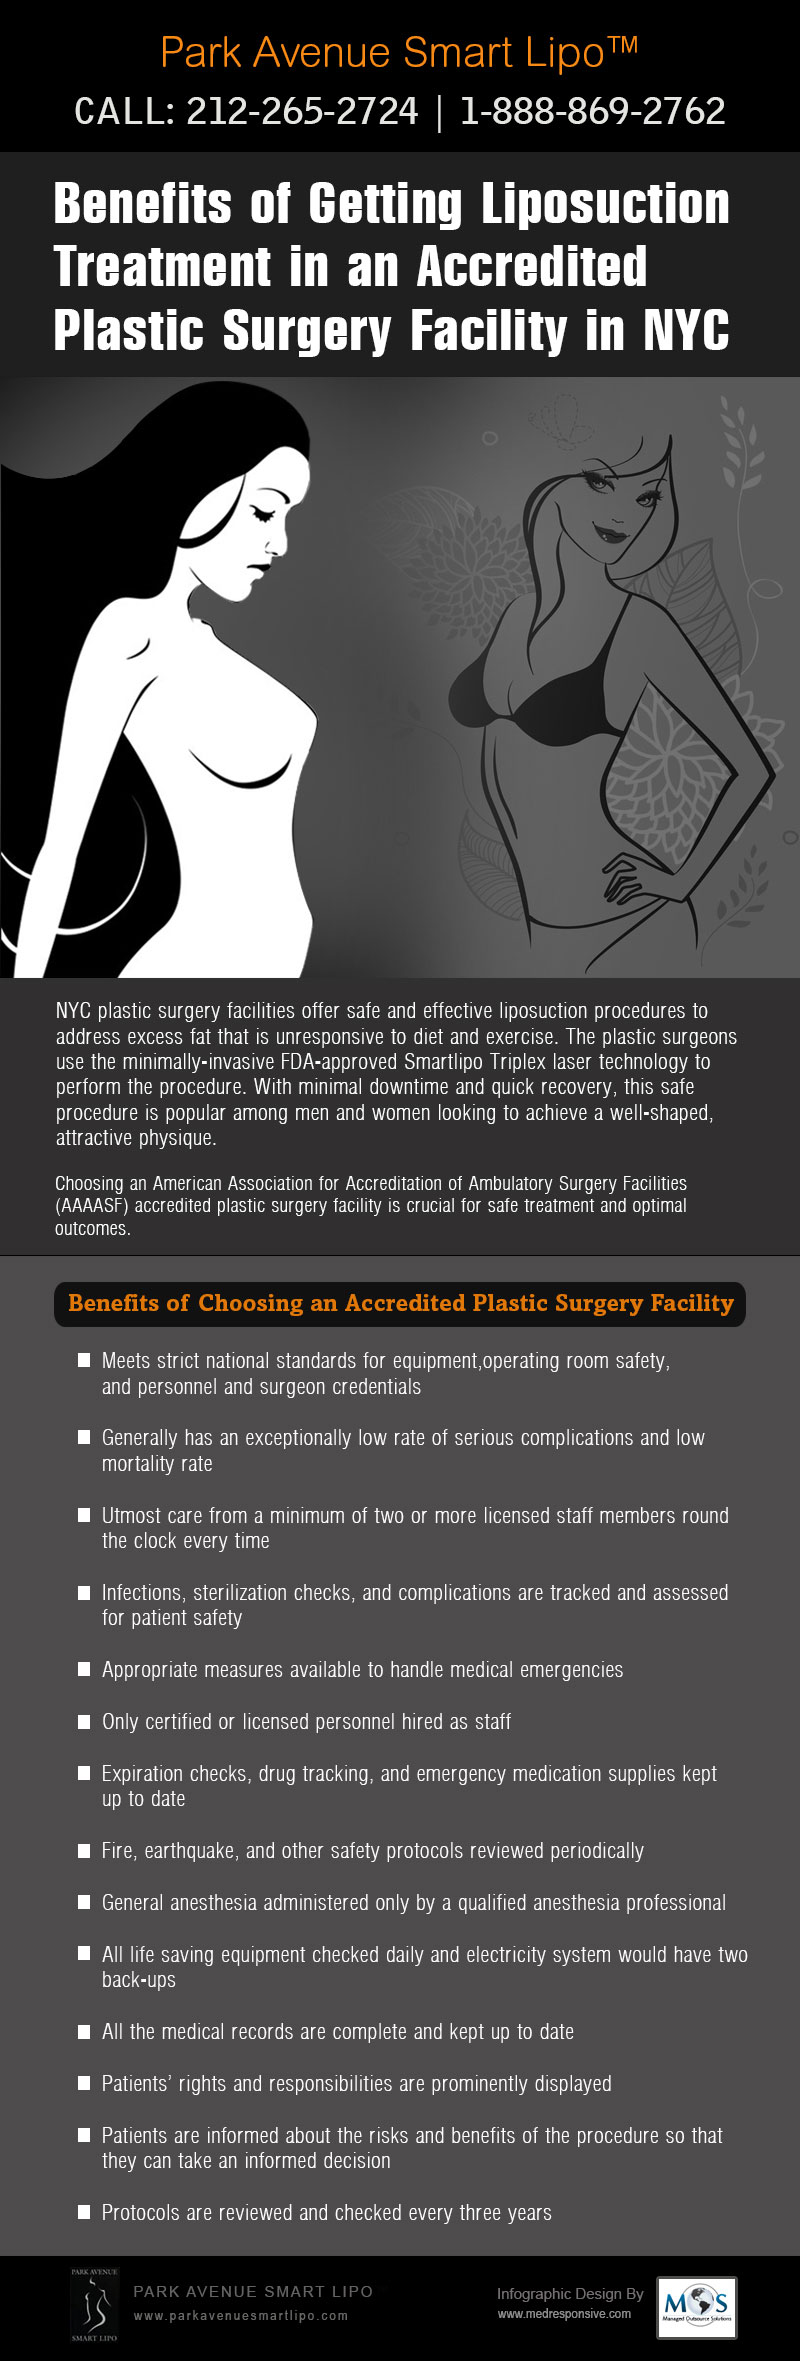 Benefits of Getting Liposuction Treatment